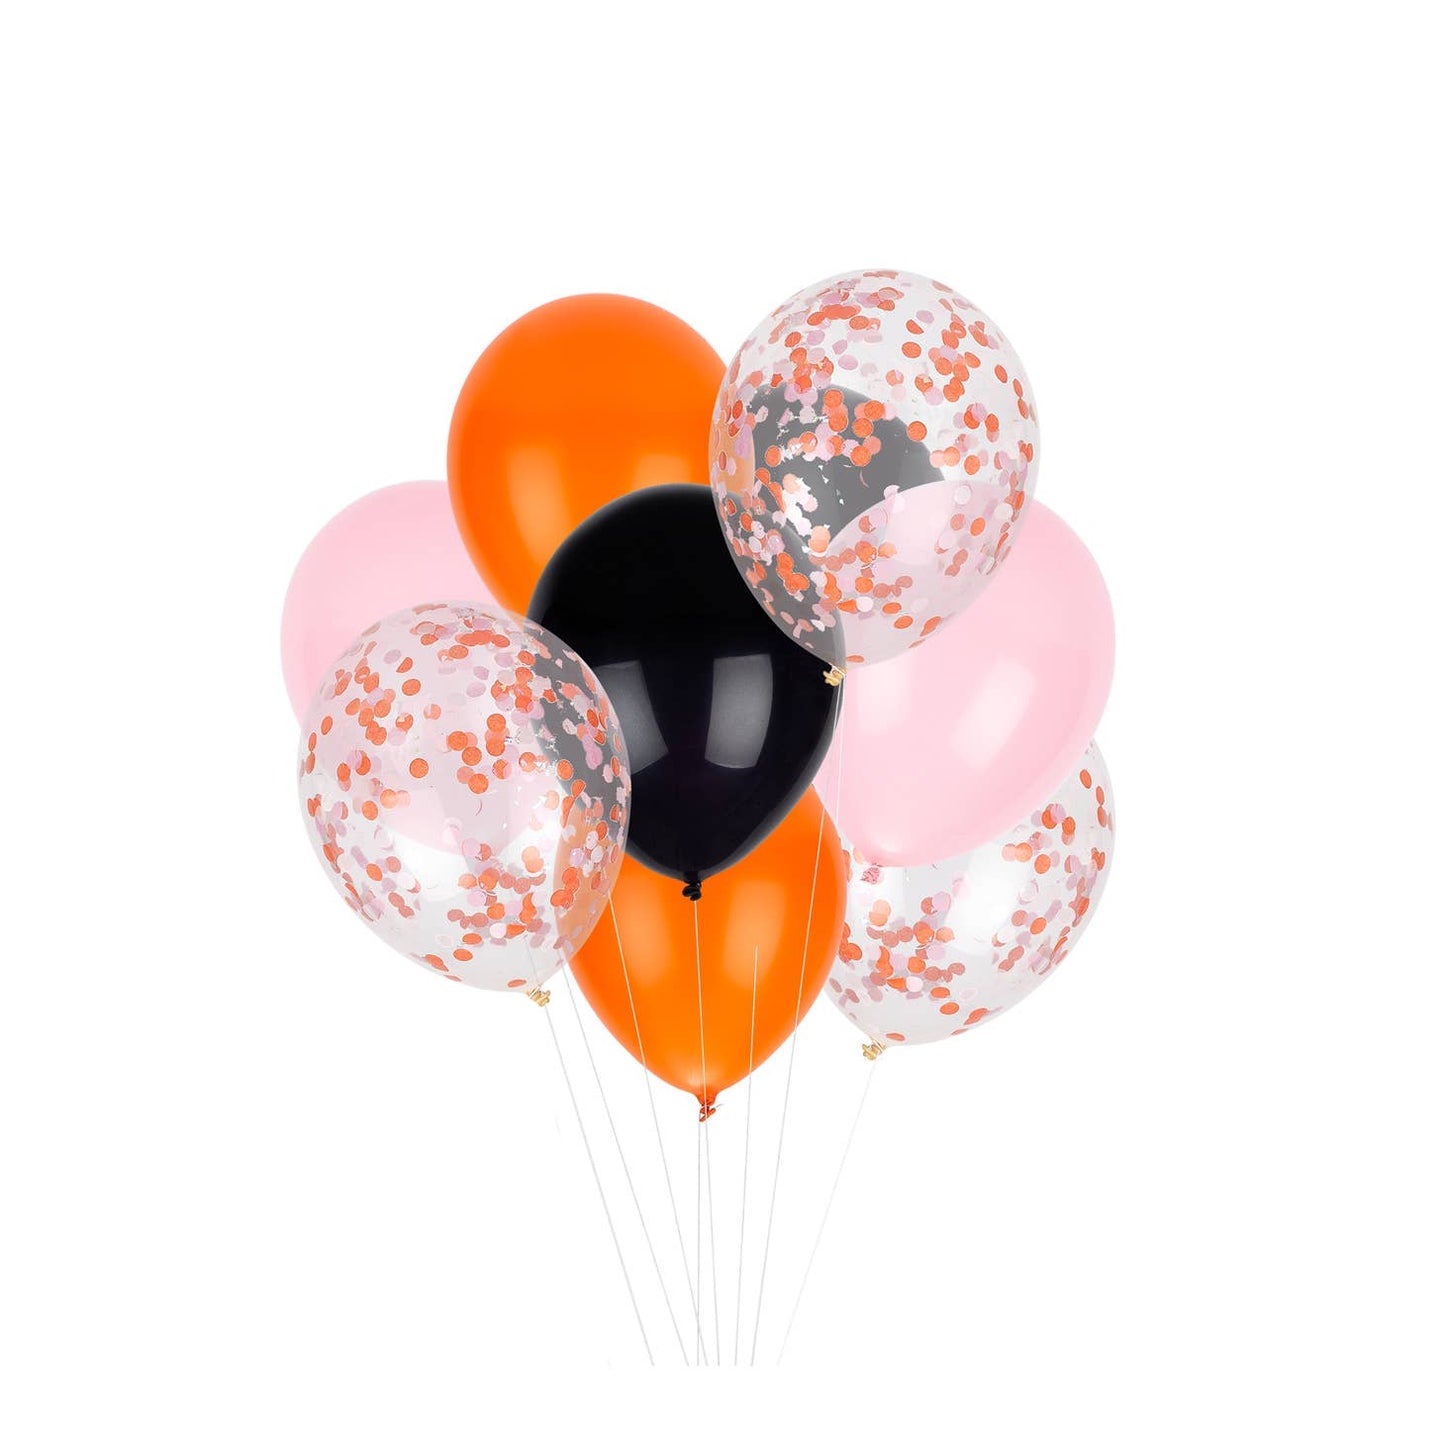 Boo Classic Balloons - Favorite Little Things Co